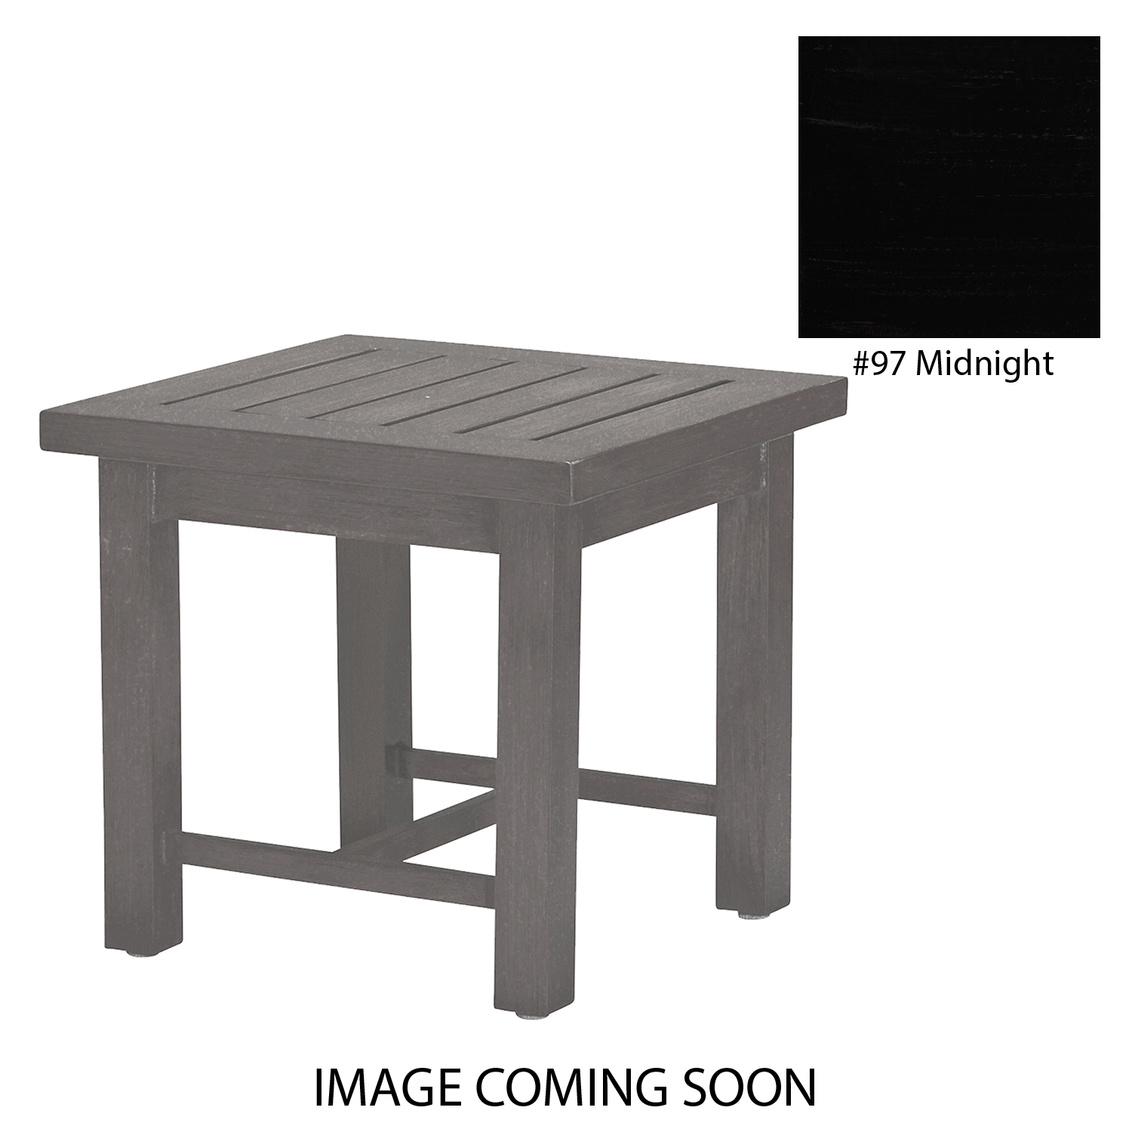 club aluminum end table in midnight product image